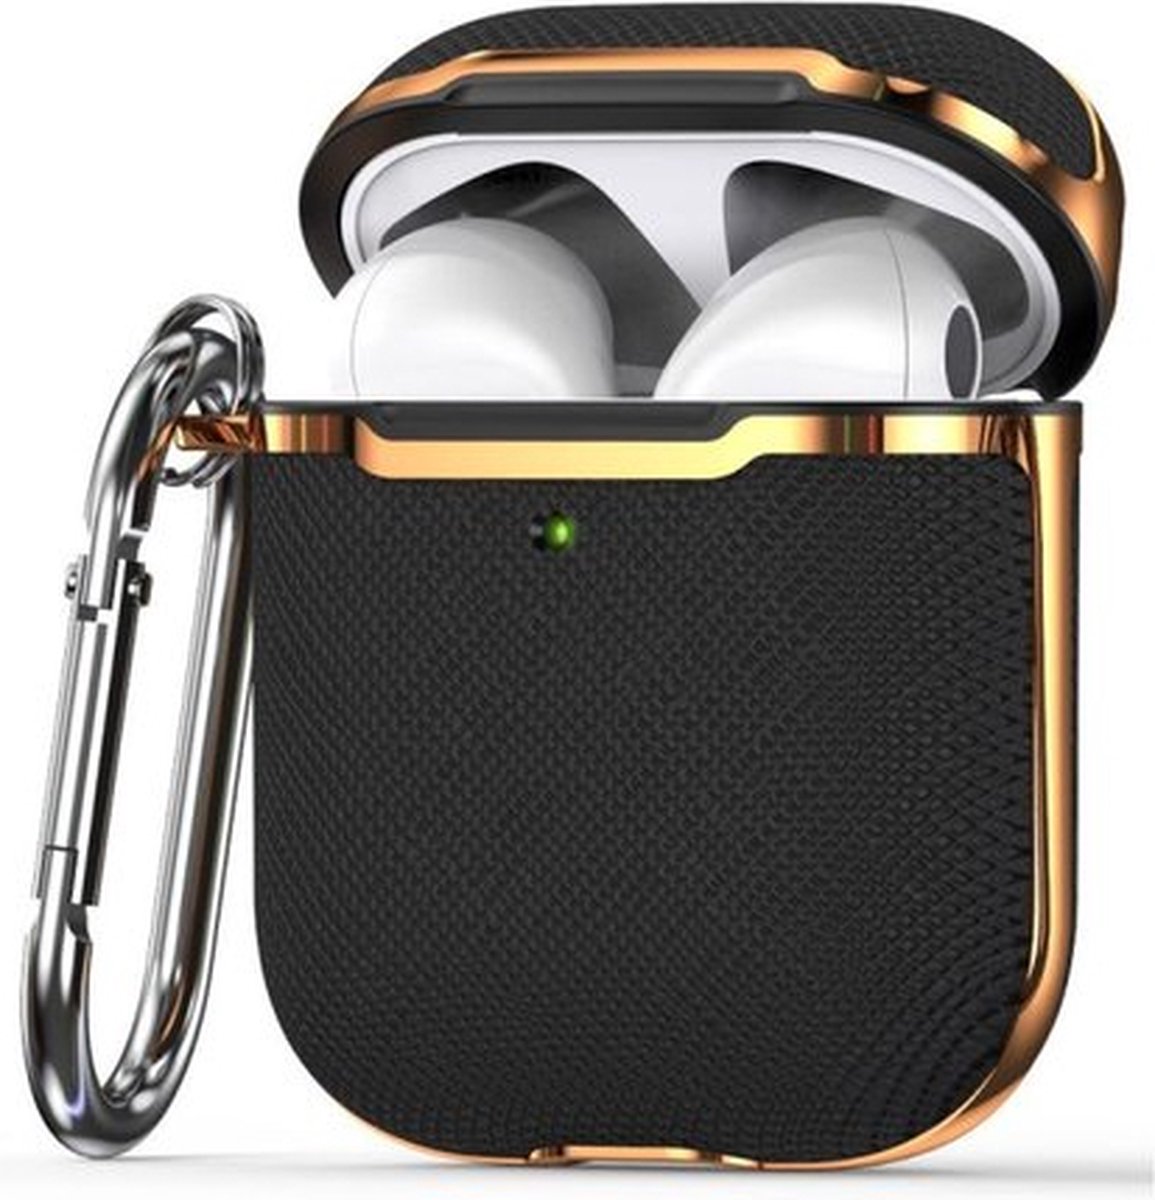 AirPods hoesjes van By Qubix AirPods 1-2 hoesje - Hardcase - Plated series - Zwart + Goud Airpods Case Hoesje voor Airpods Airpods 1 Airpods 2 Hoes